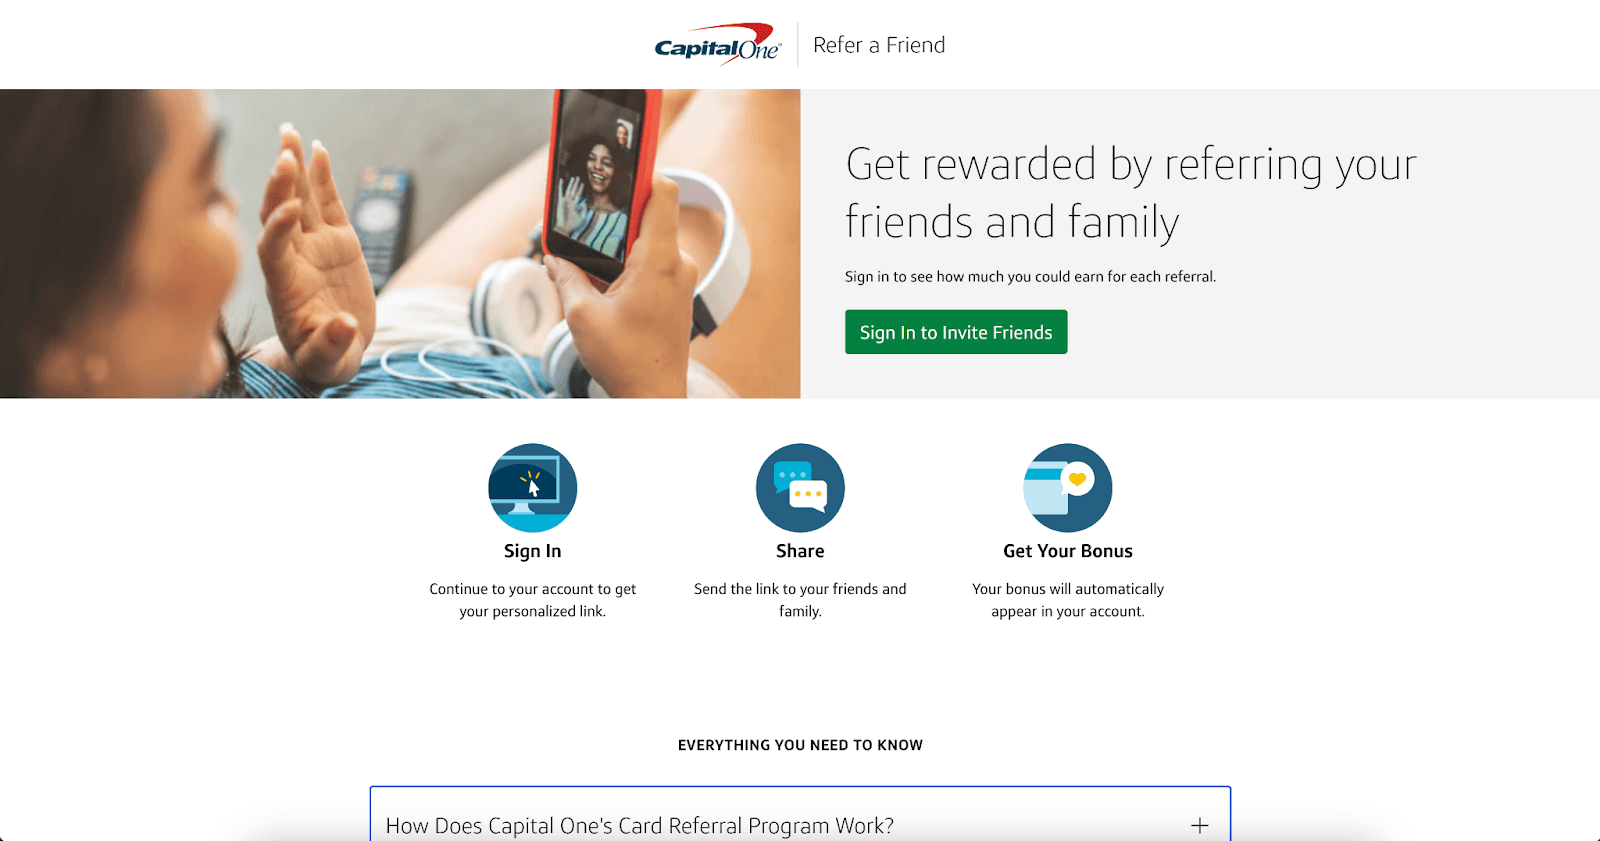 Example of referral marketing from CapitalOne